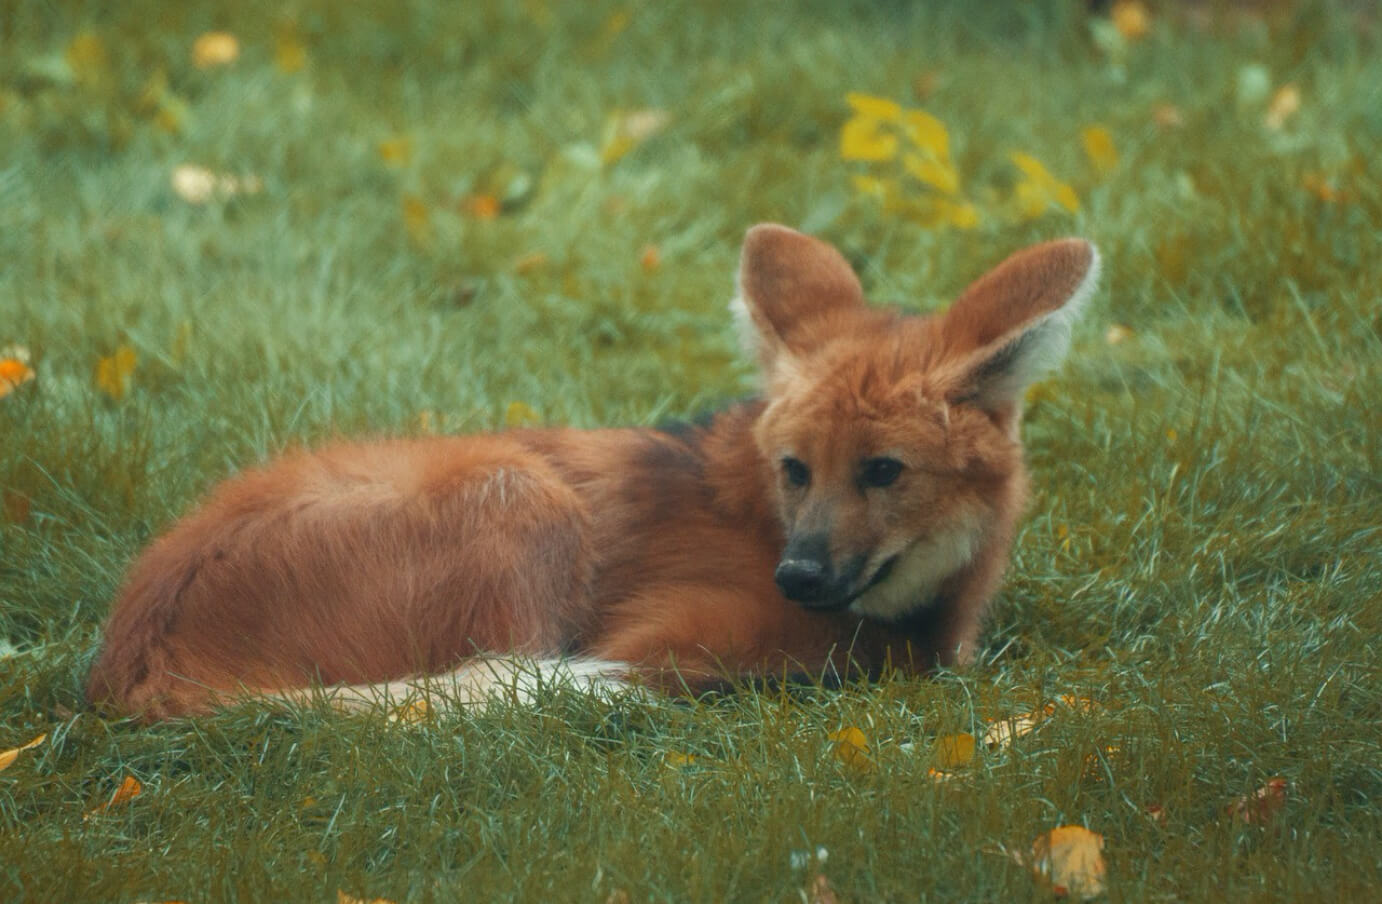 Falkland Island wolf laying in the grass